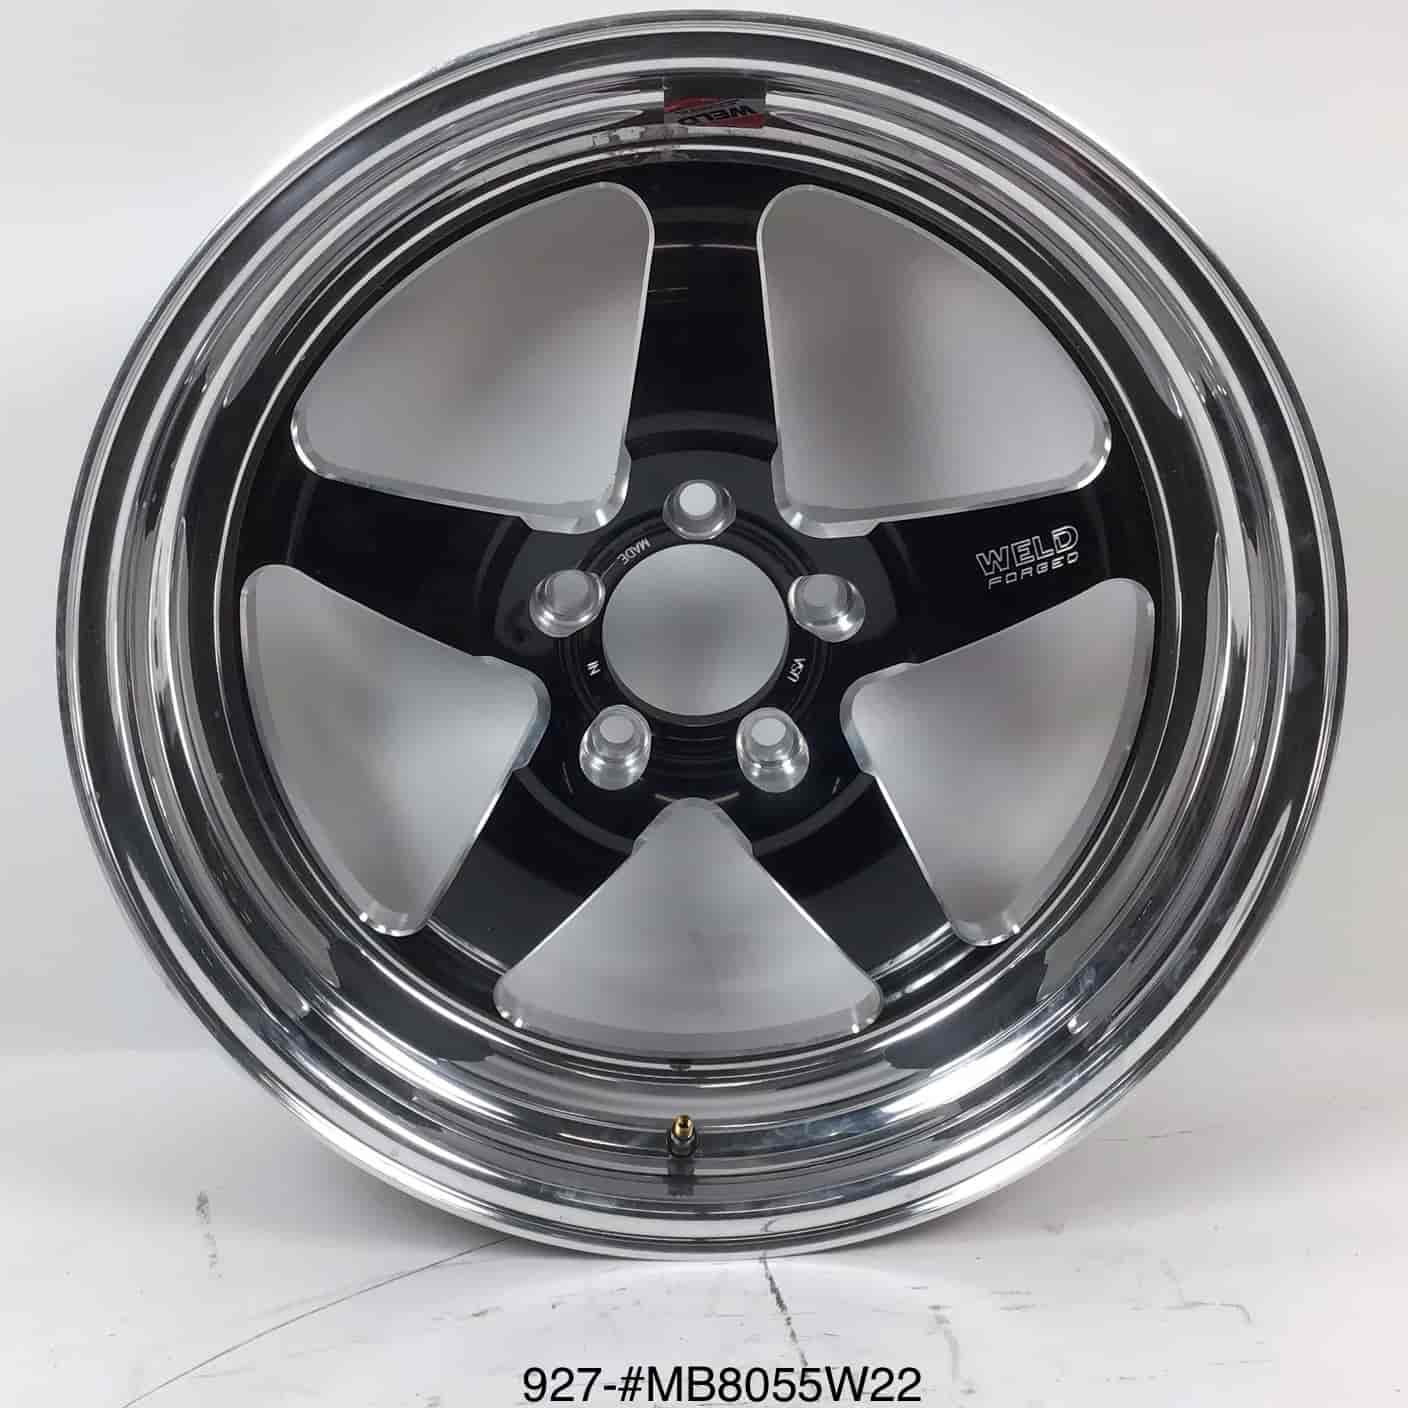 *BLEMISHED* RT-S Series Wheel Size: 18" x 5.5" Bolt Circle: 5 x 115mm Rear Spacing: 2.20"